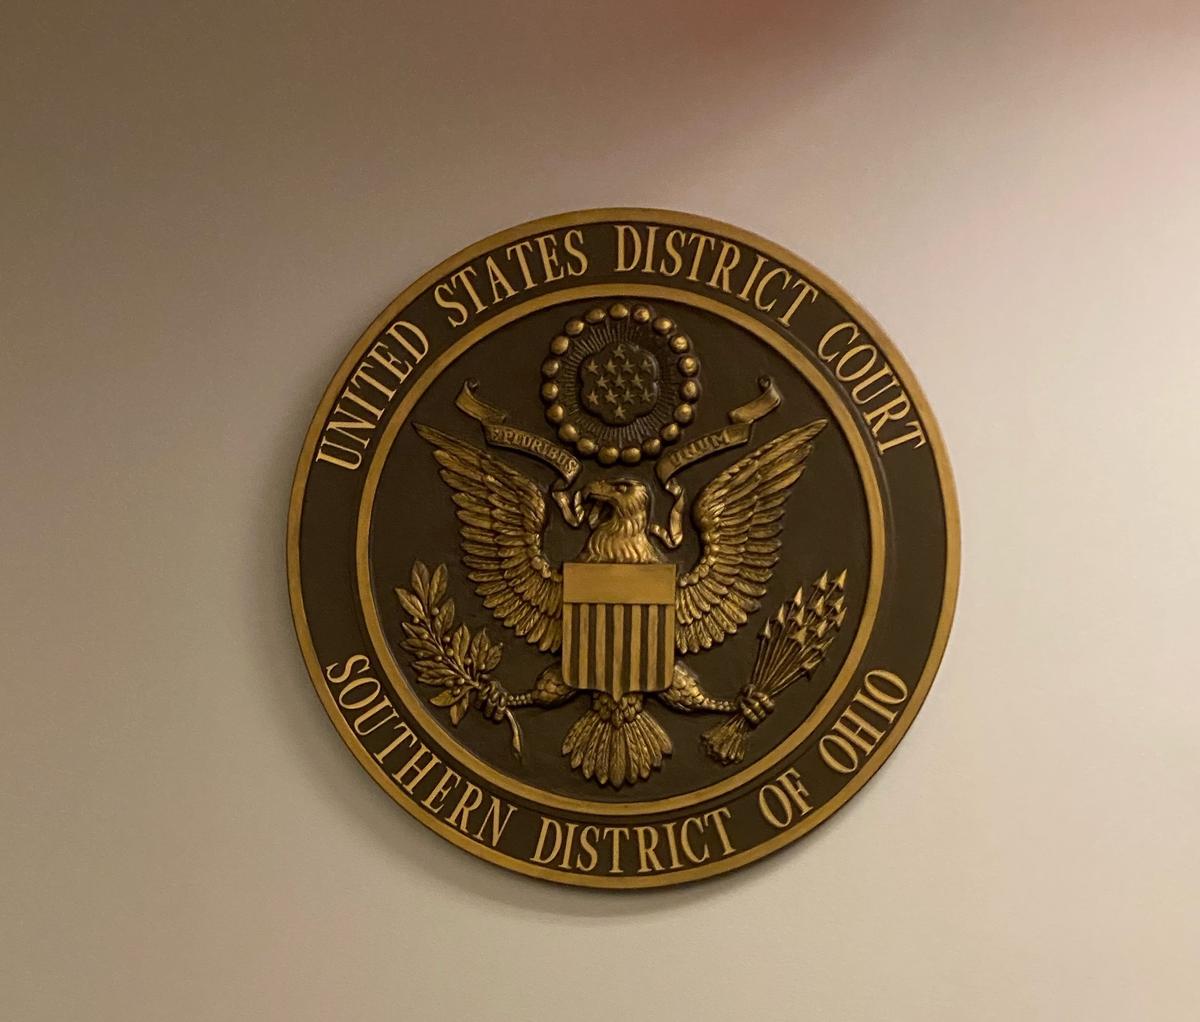 The seal of the U.S. District Court adorns a wall on the ninth floor of the Federal Building in Dayton, Ohio, on Sept. 6, 2022. (Photo Courtesy of Victoria Ellen)